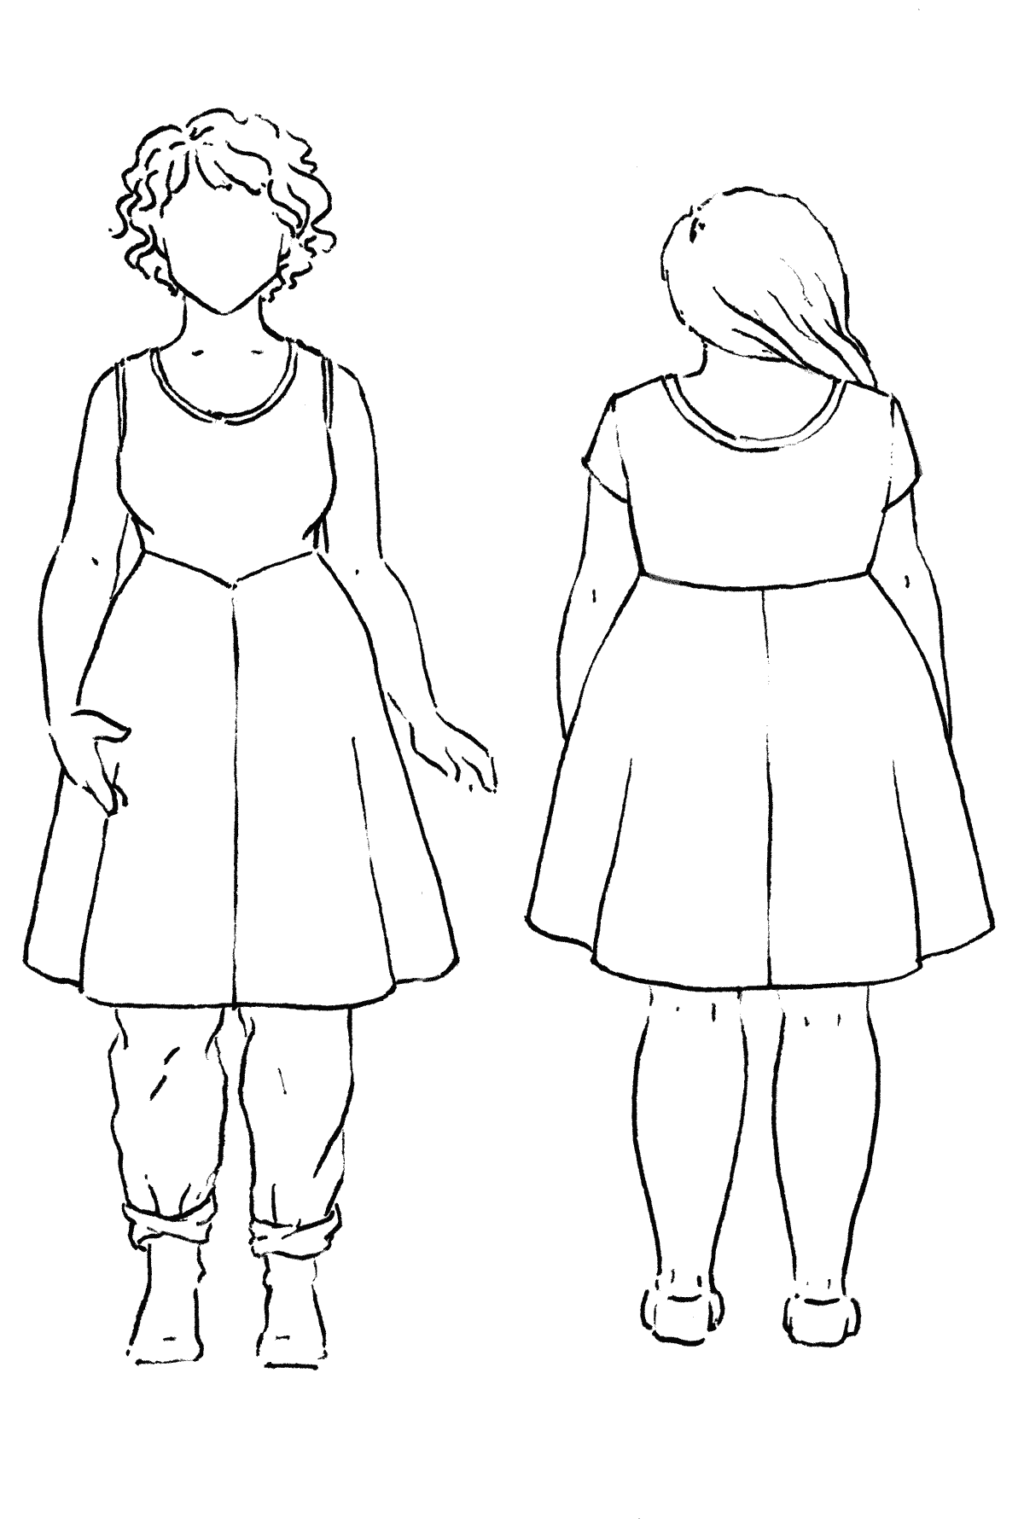 Croquis drawings of the front and back of the Stasia Dress